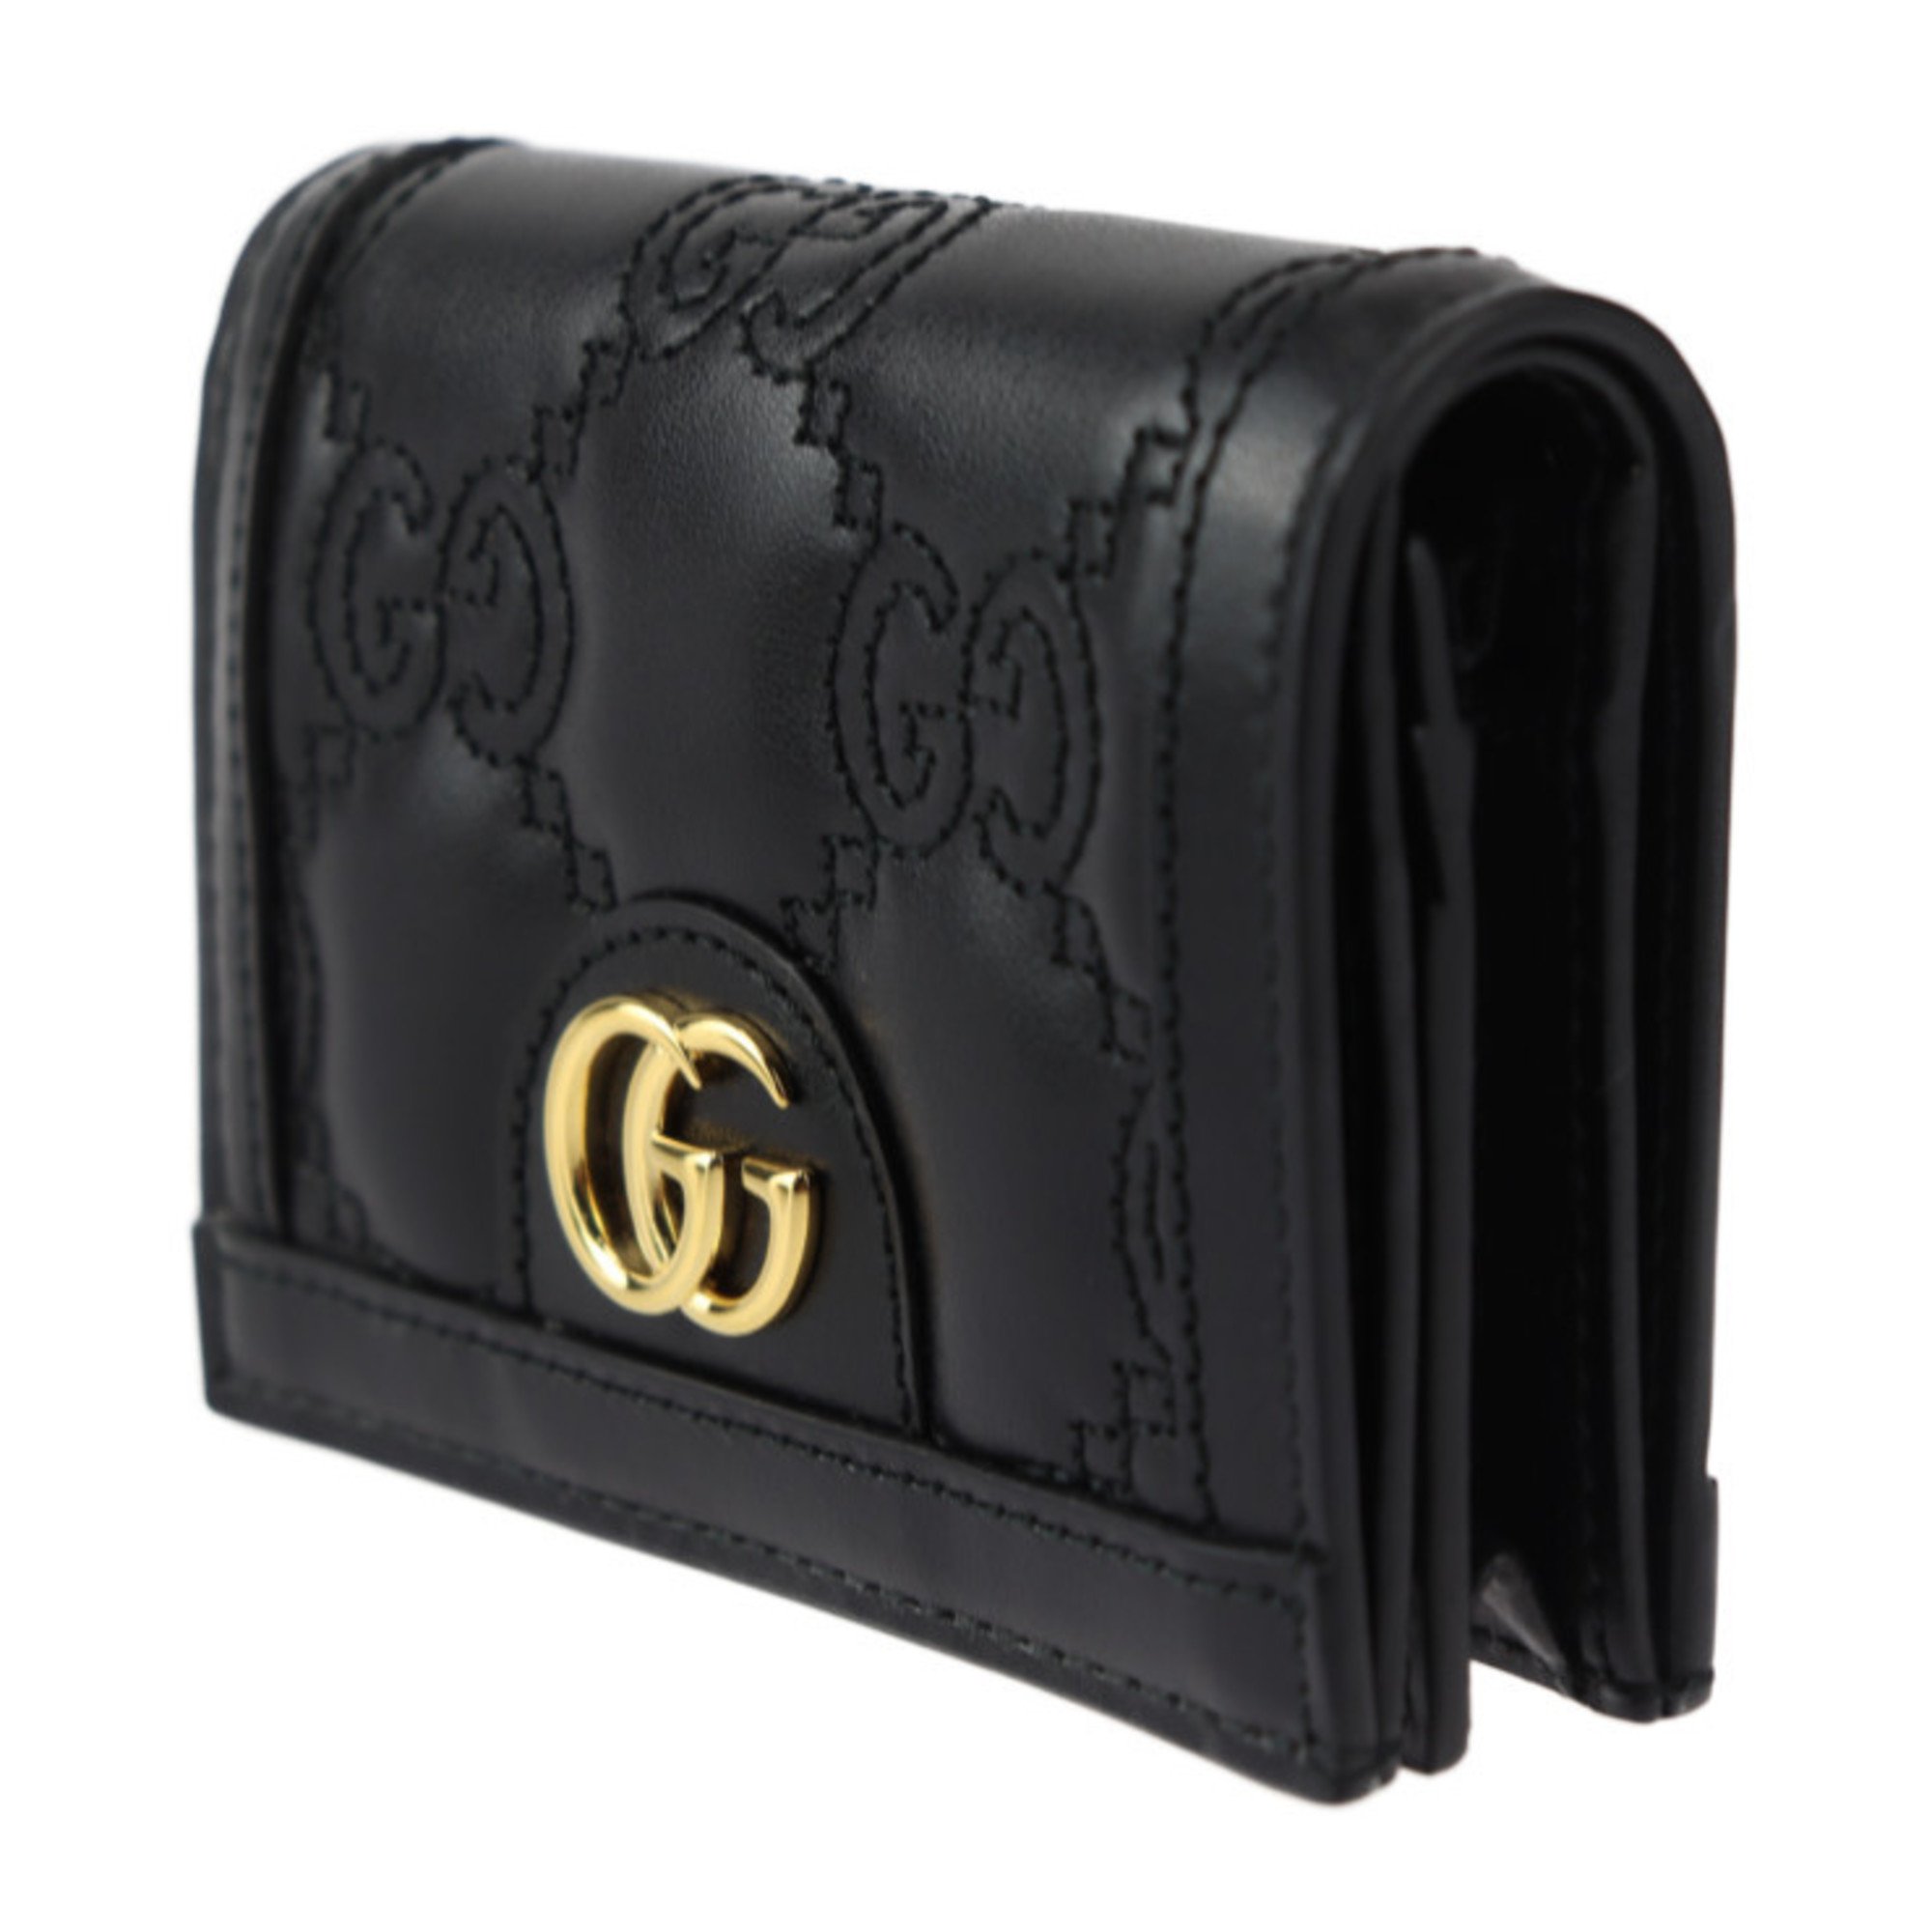 GUCCI GG Matelasse Business Card Holder/Card Case Wallet Tri-fold 723786 Leather Black Compact